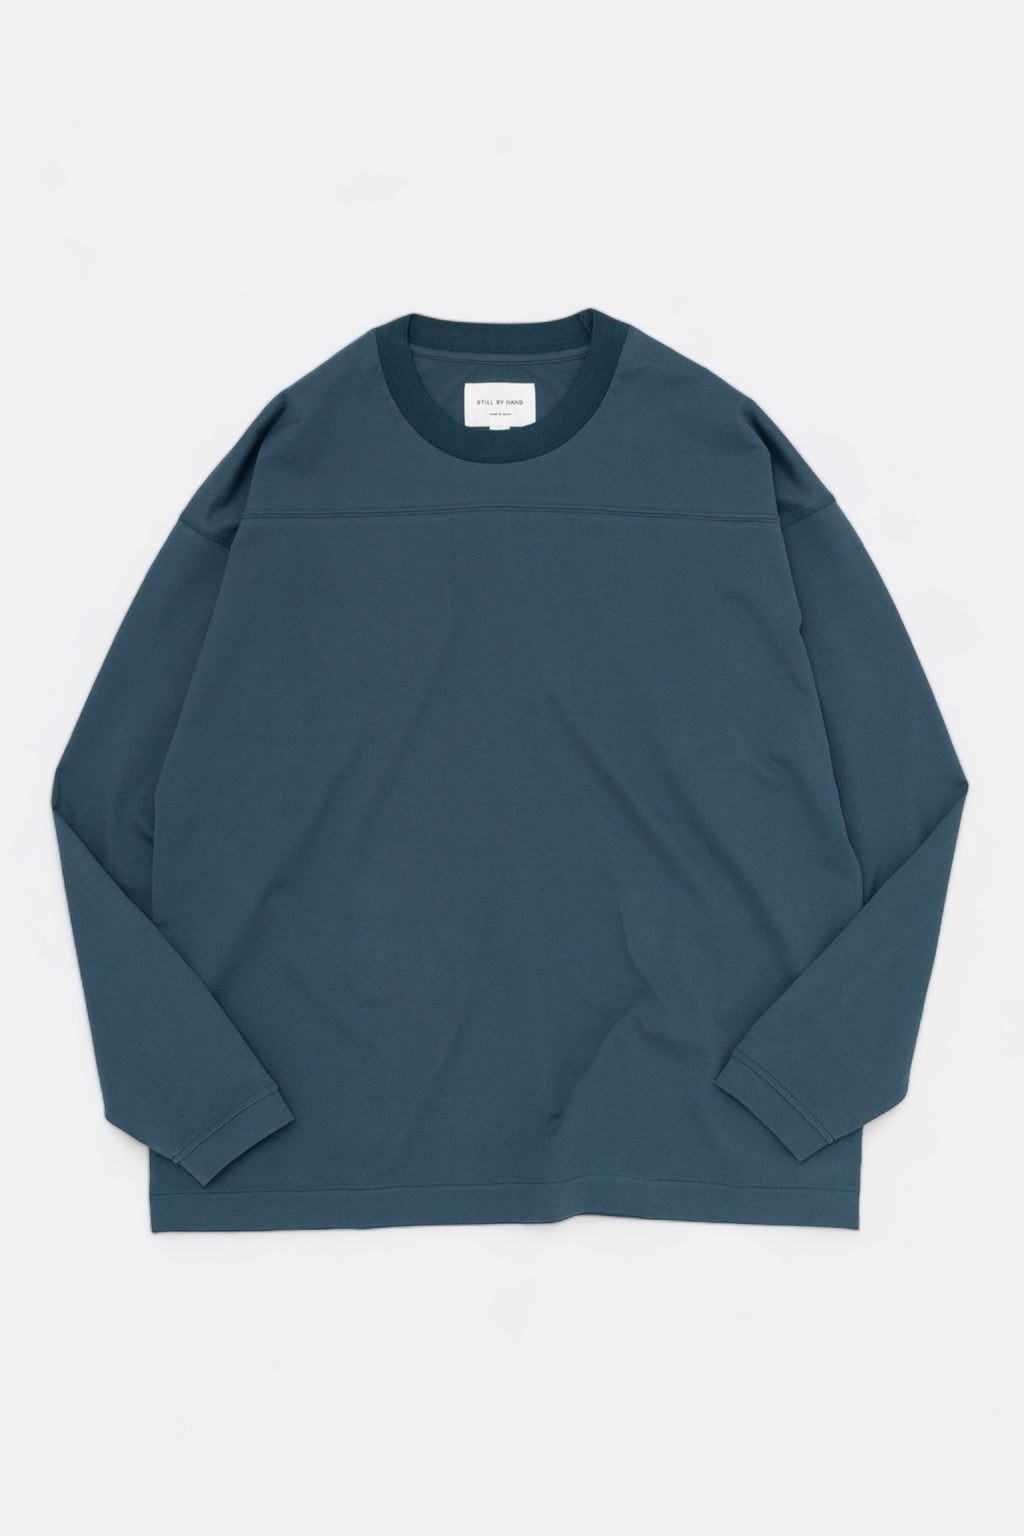 Still By Hand - Knitted Rib Long Sleeve (Slate Blue)